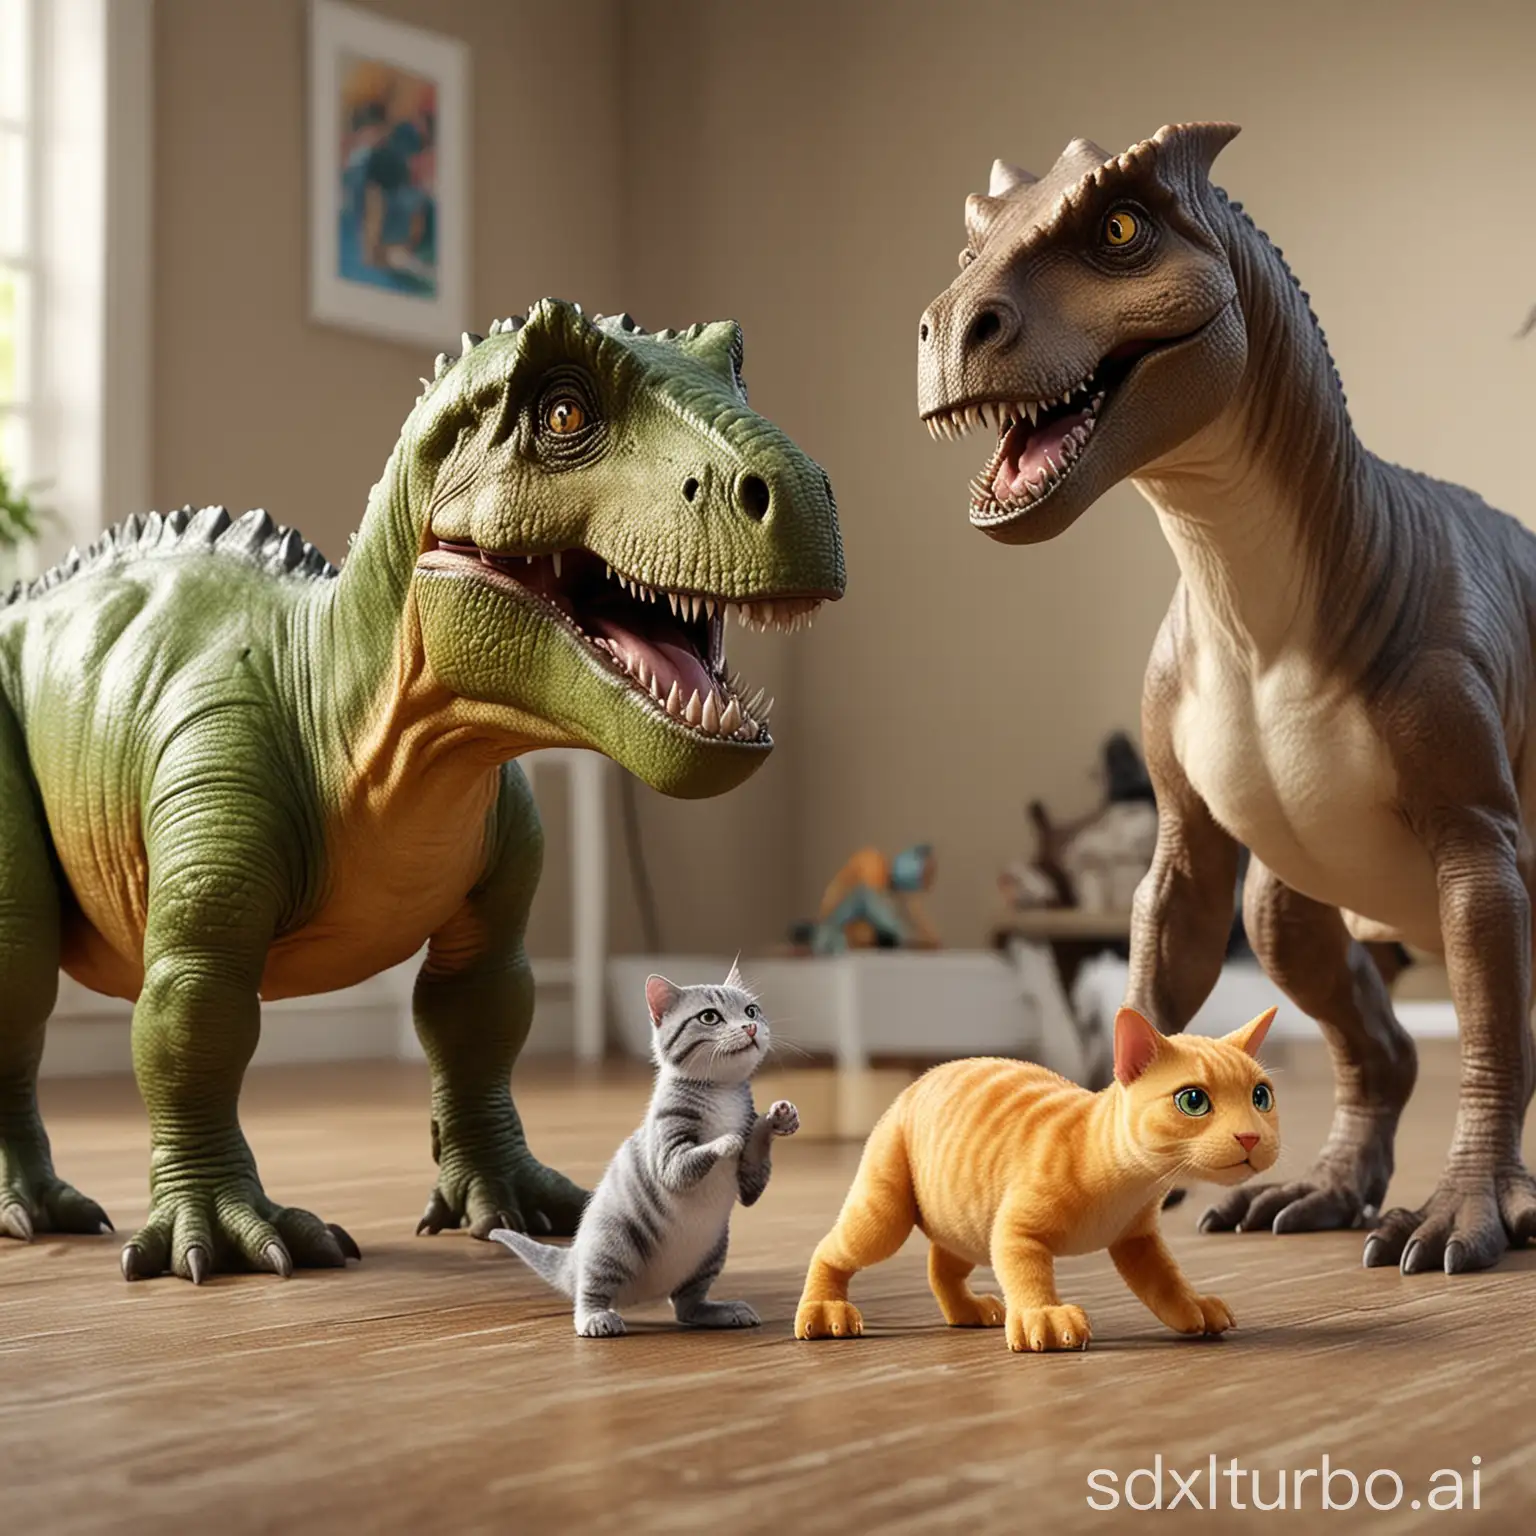 Dinosaurs as a pet next to a dog and a cat